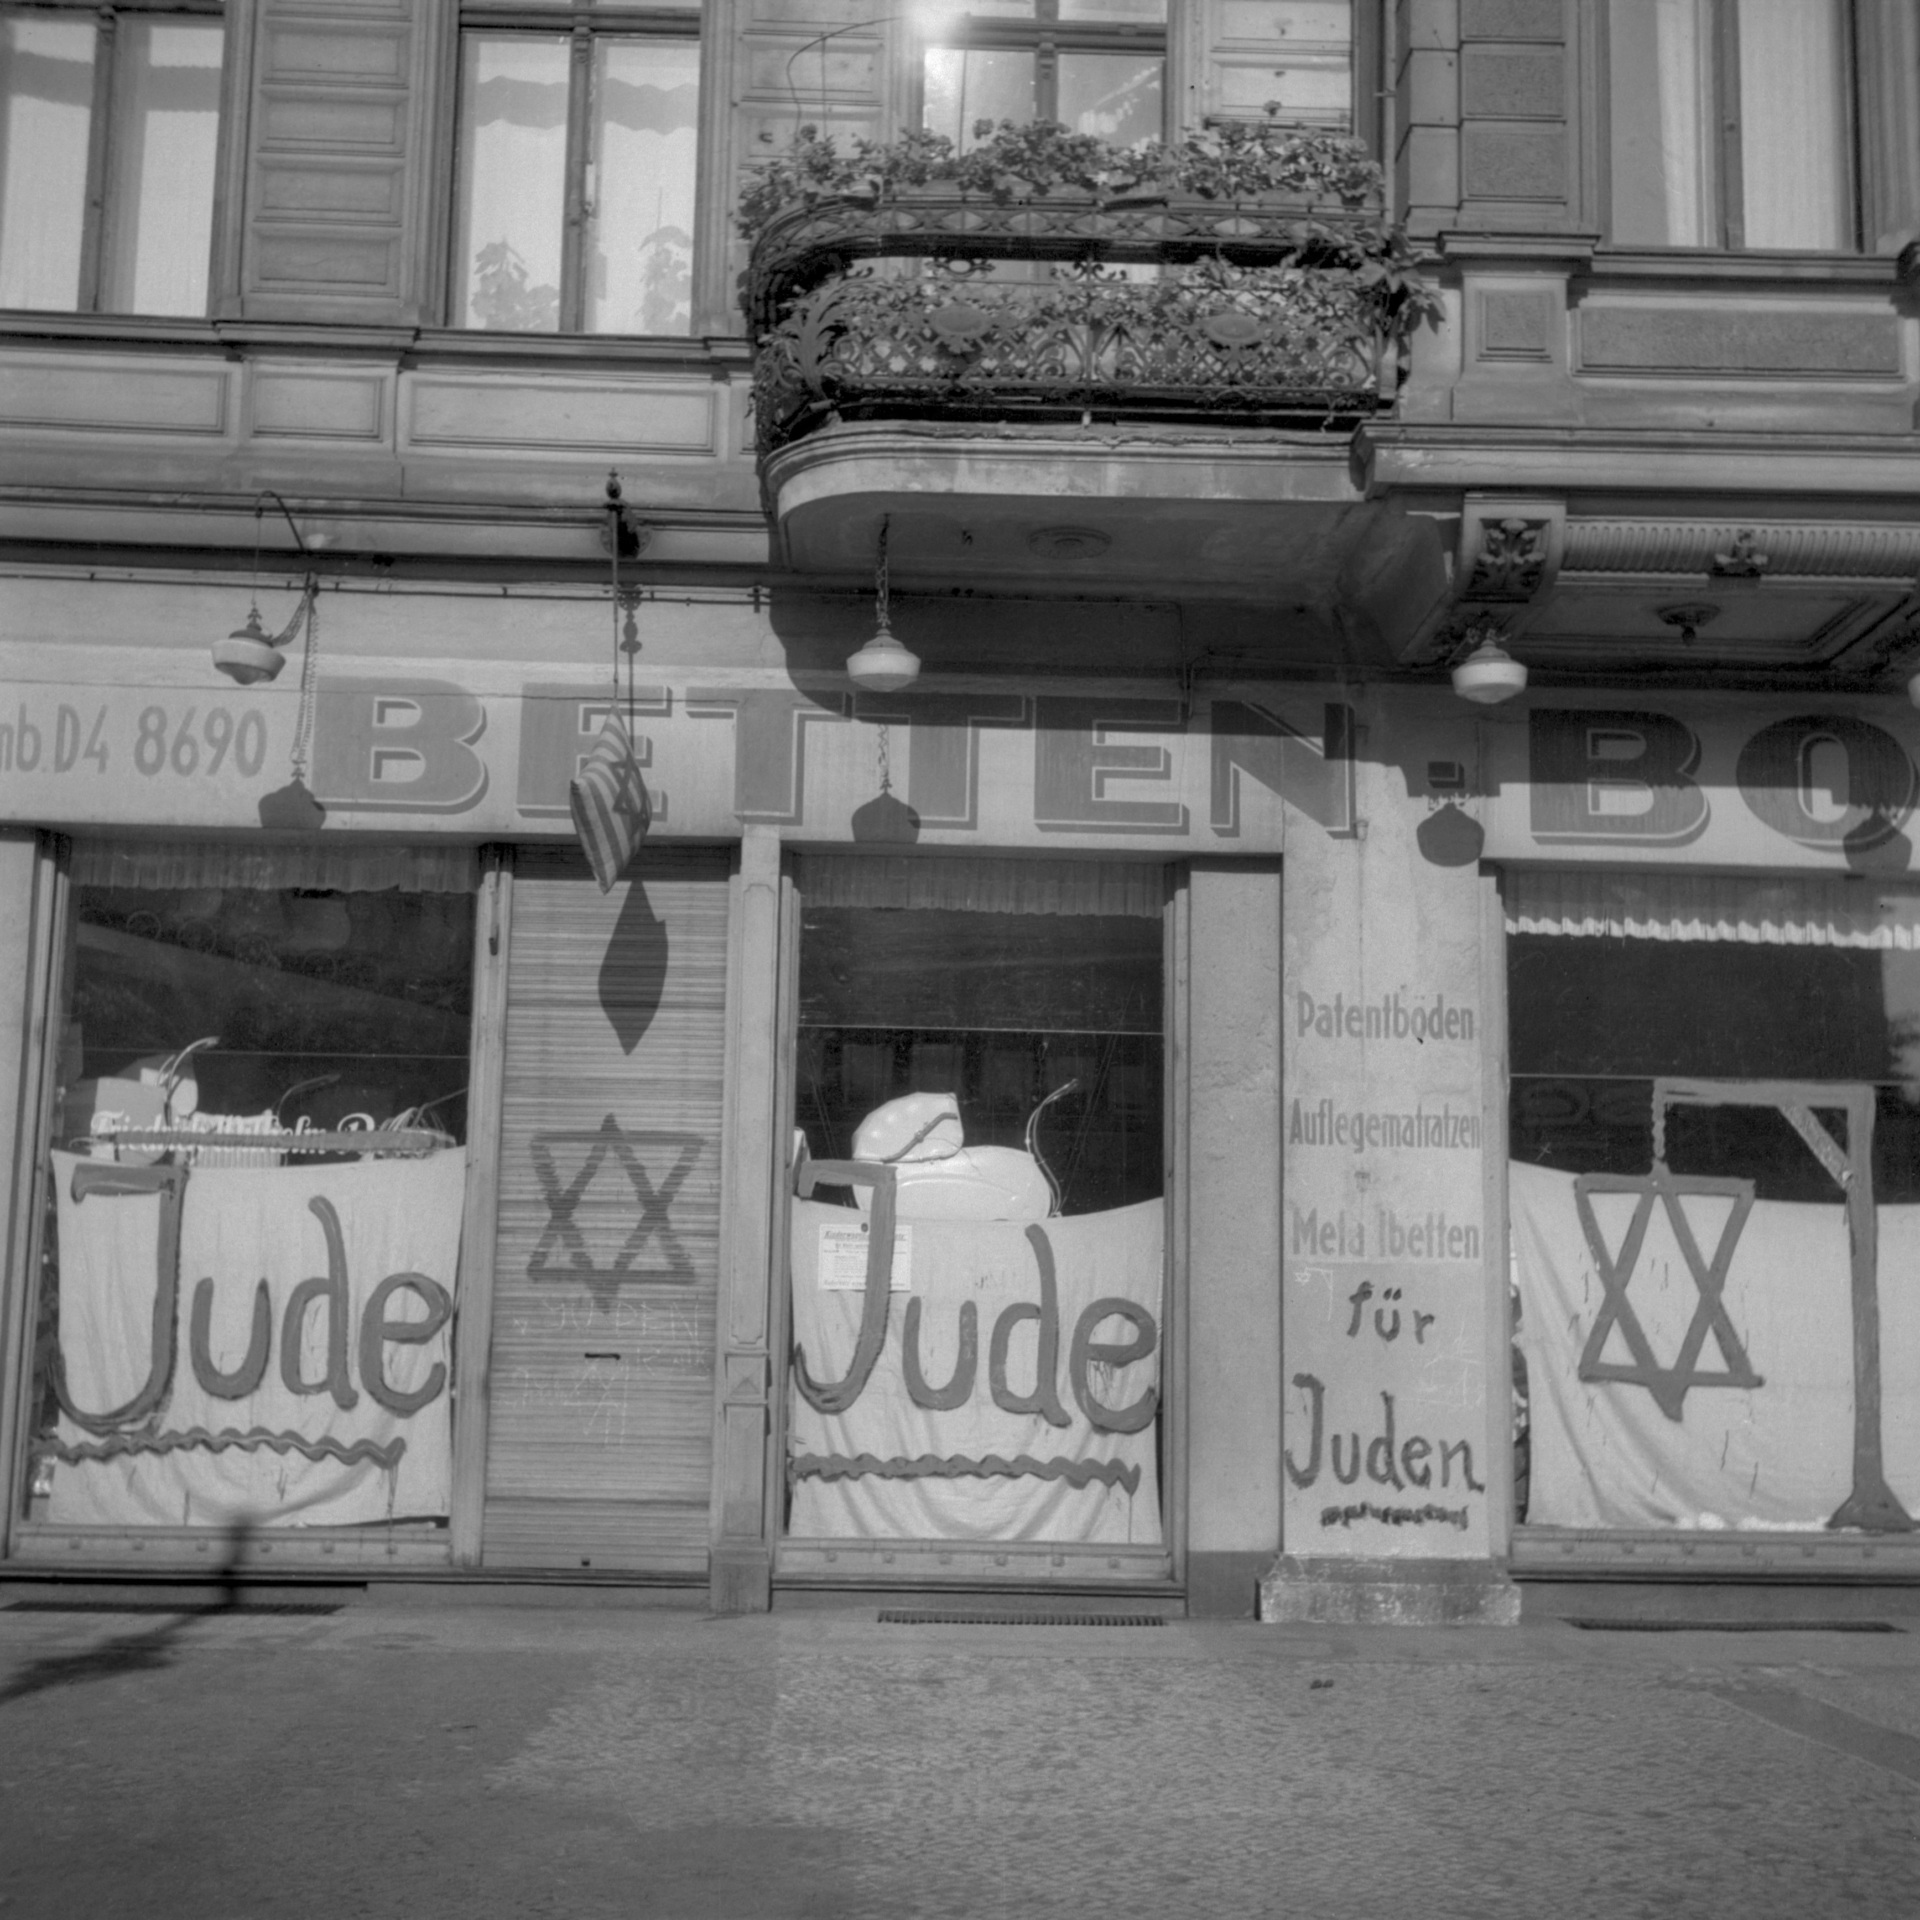 TOPSHOT - A picture taken in Berlin shows a Jewish-run shop inscripted with nazi antisemitic graffitis during the June 1938 antisemitic campaign. Ordered by the Nazi party NSDAP in November 1938, rioters burnt down 267 synagogues, shattered the windows of some 7500 Jewish shops, desecrated Jewish cemeteries and beat people, 09 November 1938. Splintering glass panes and broken glass in the streets gave the pogrom the downplaying name "Reichskristallnacht", or Crystal Night. AFP PHOTO / FRANCE PRESSE VOIR (Photo by PIGISTE / FRANCE PRESSE VOIR / AFP) (Photo by PIGISTE/FRANCE PRESSE VOIR/AFP via Getty Images)